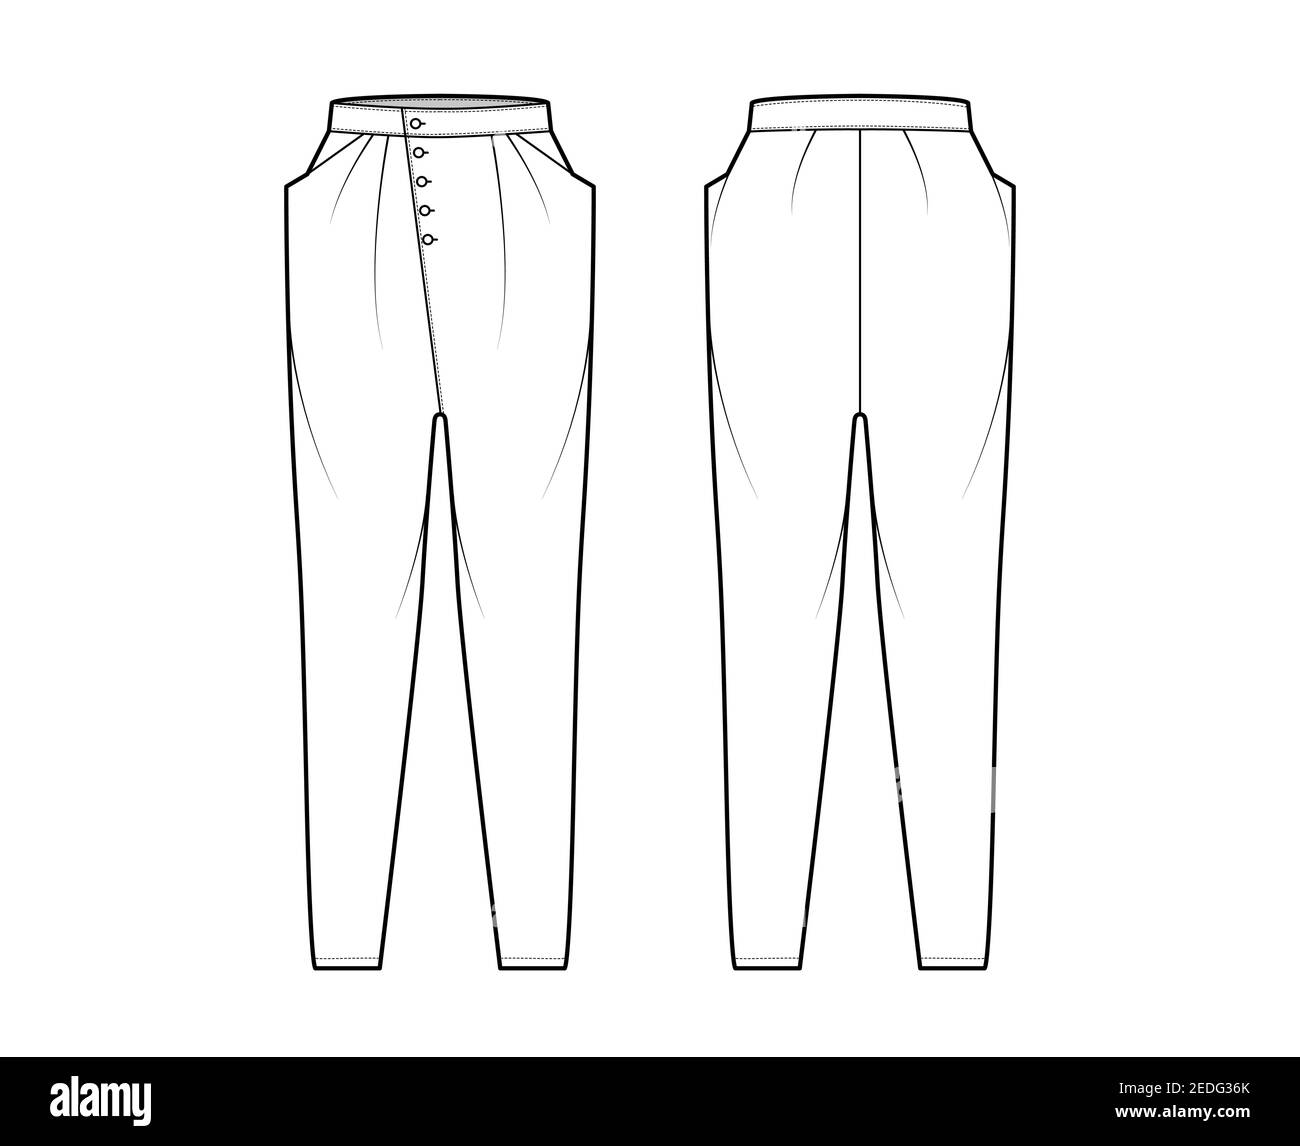 How to Draw Pants for Male Fashion Figures  dummies